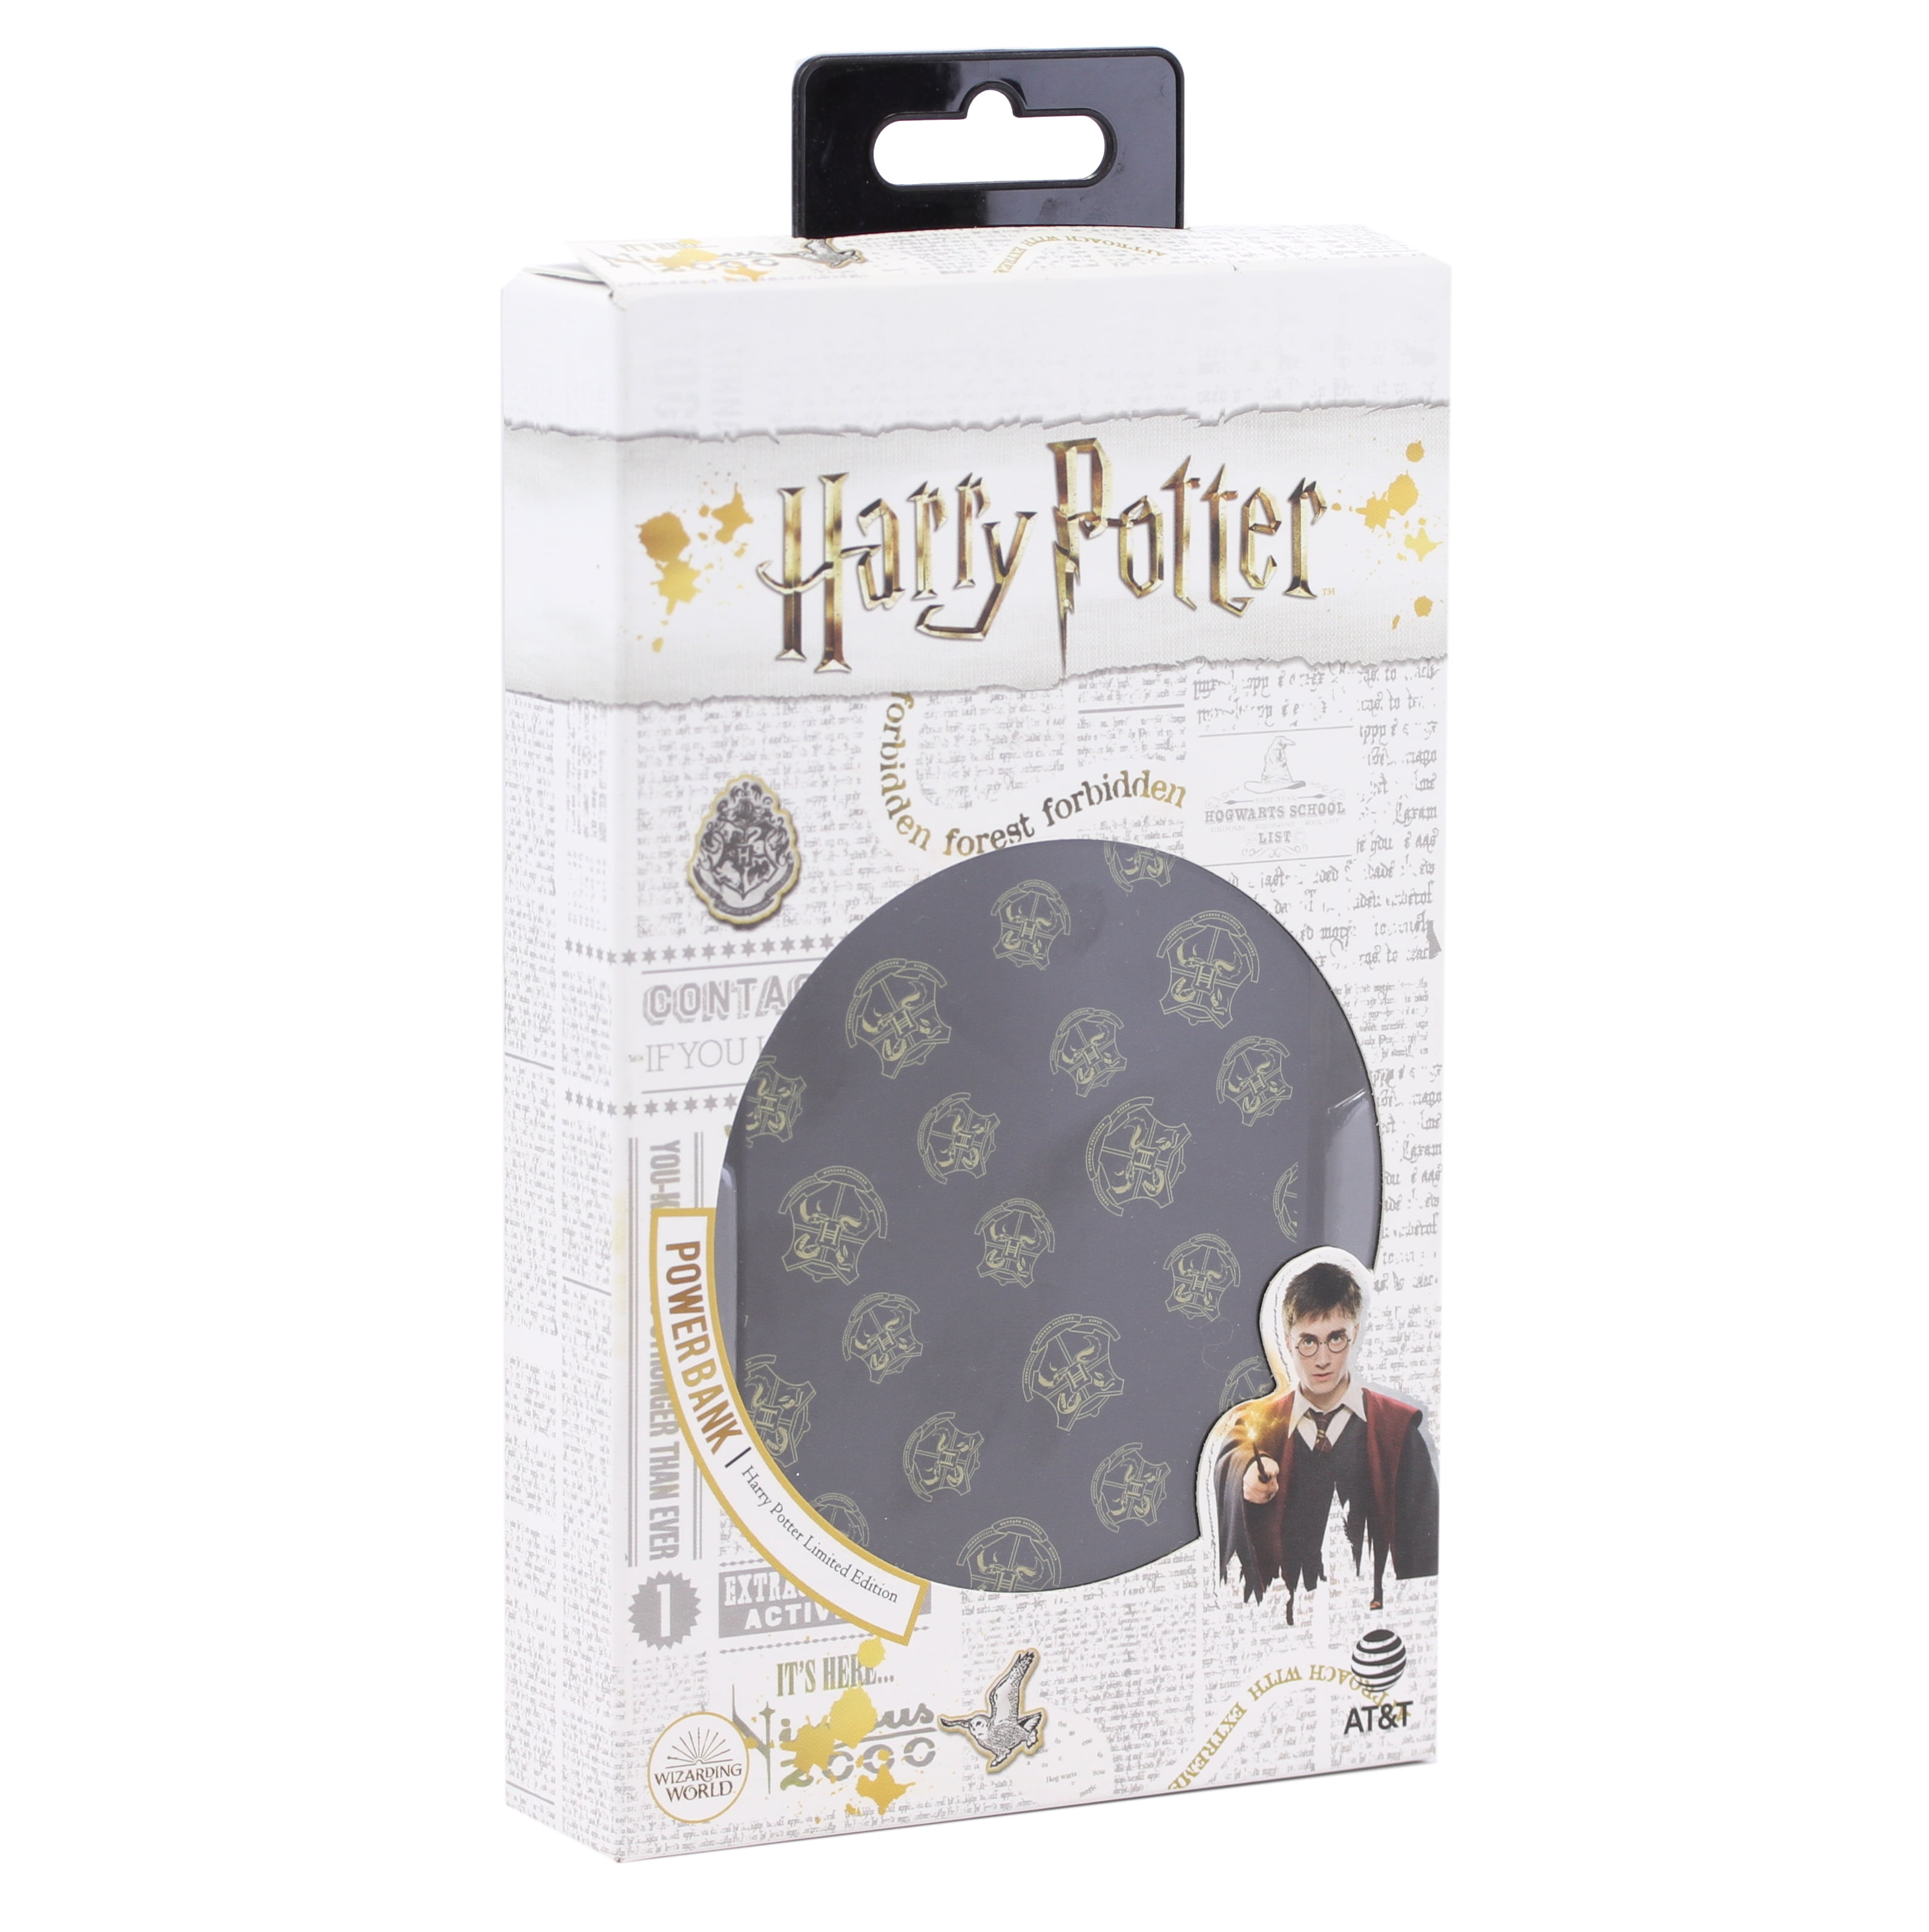 Powerbank 5,000 mAh LIMITED EDITION **NEW / FREE SHIPPING** Details about   Harry Potter 